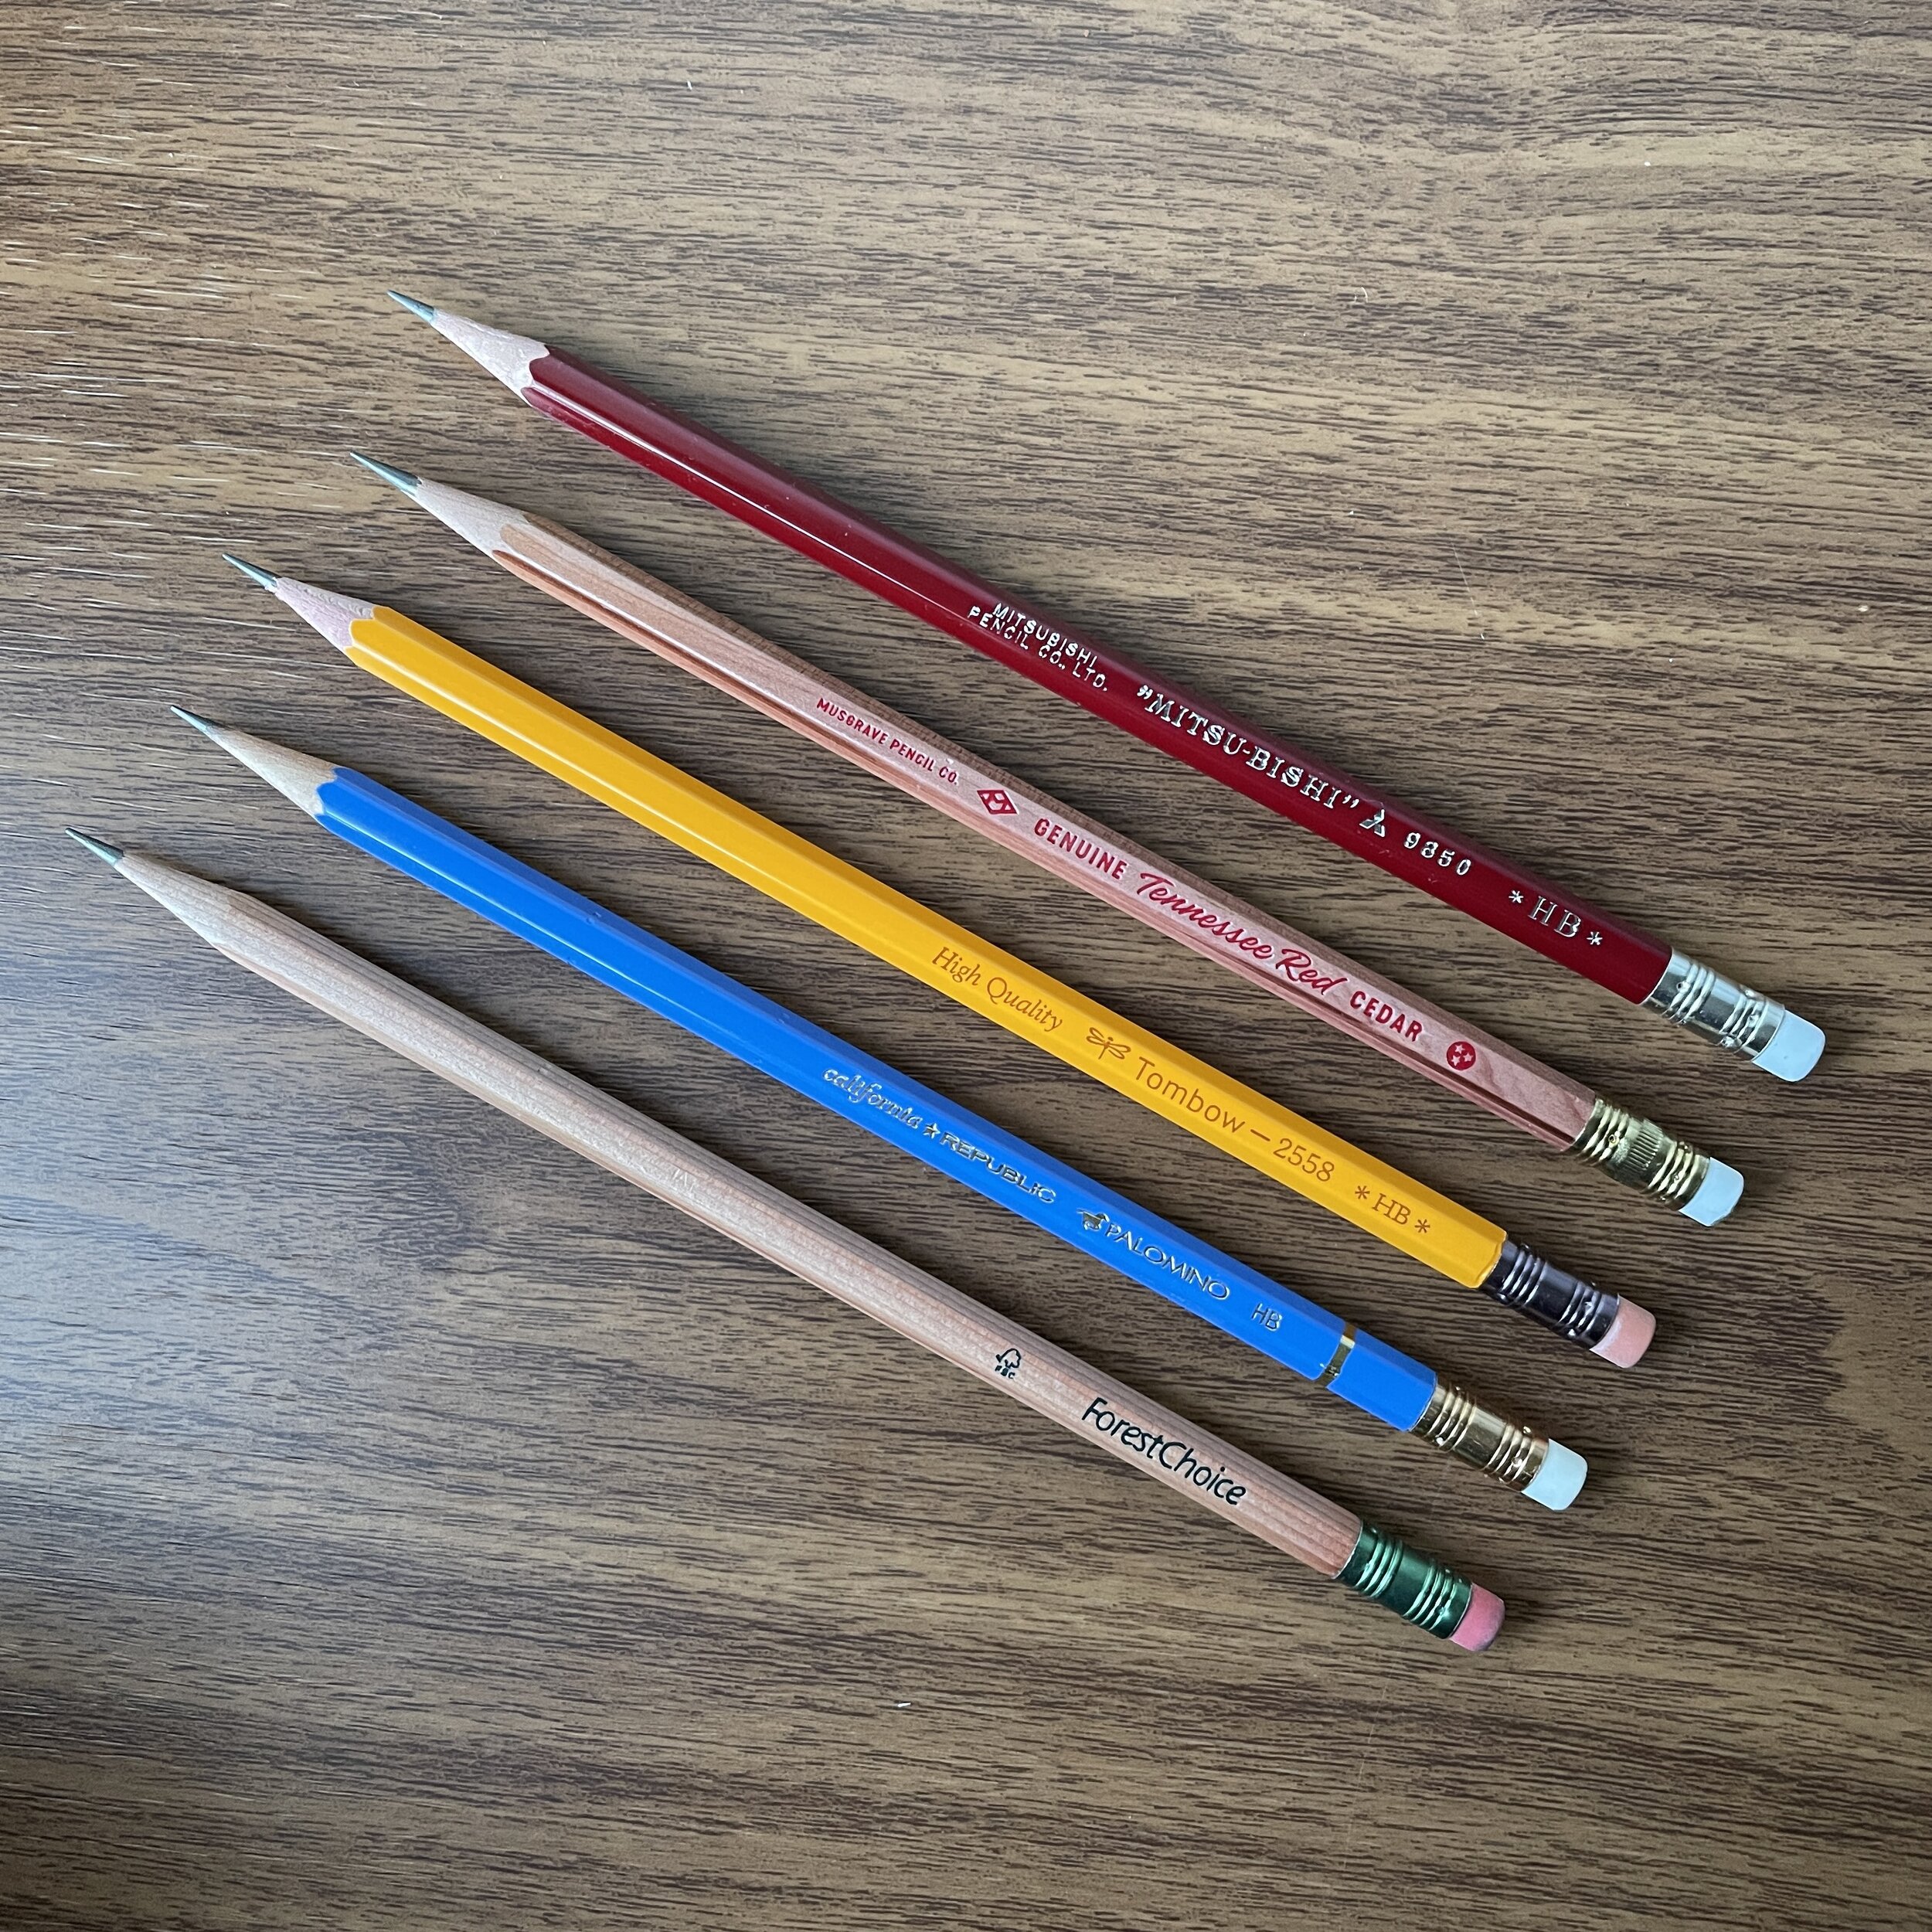 My Five Best Pencils for Everyday Writing, Five Years Later — The